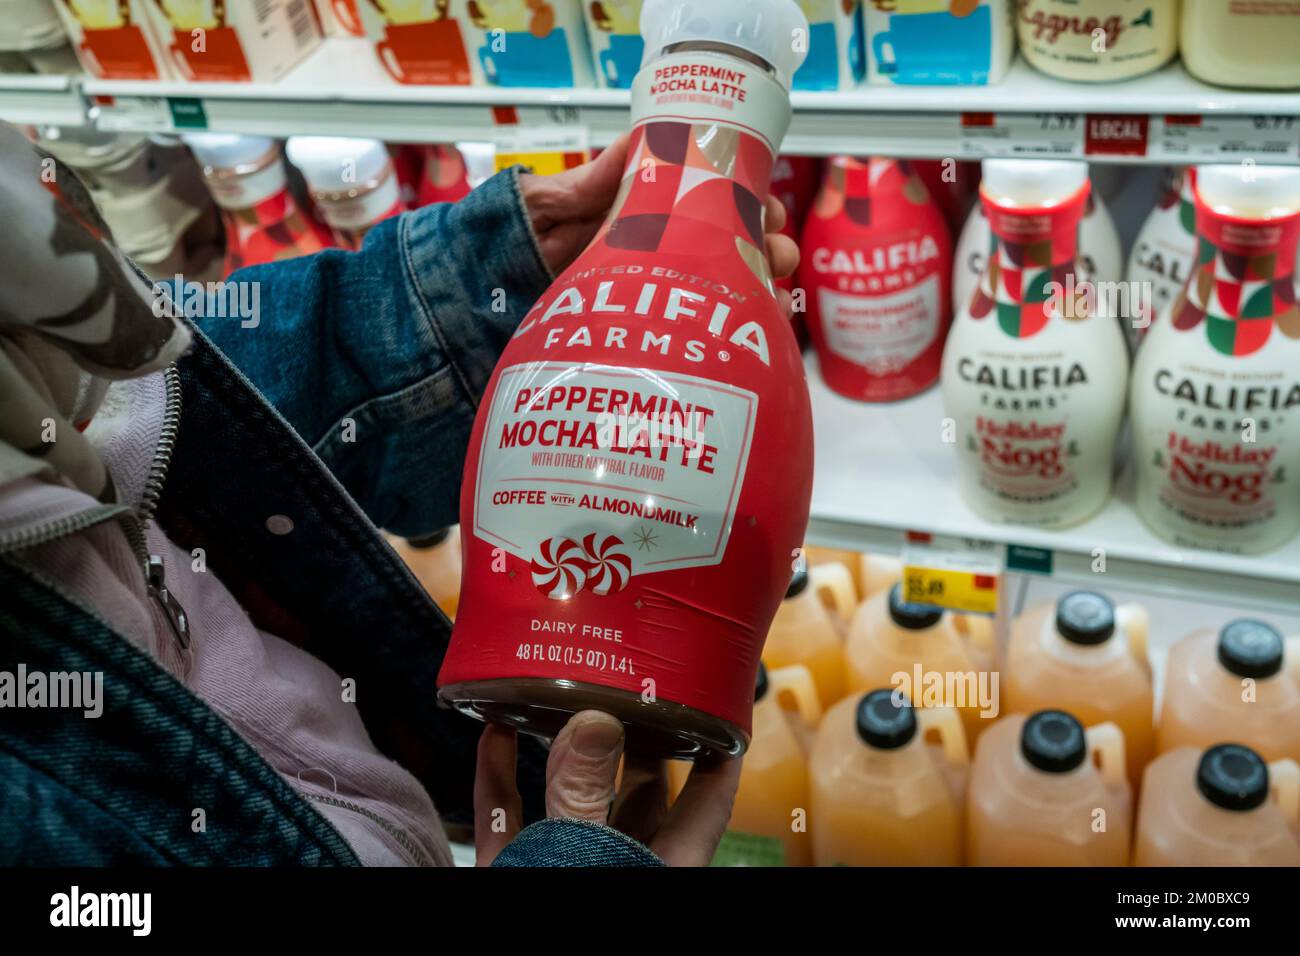 A shopper chooses a bottle of Christmas themed Peppermint Mocha Latte, coffee with almond milk, from Califia Farms in a Whole Foods supermarket in New York on Monday, November 28, 2022. The U.S. Federal Reserve Bank reported that it will be difficult to bring inflation down without a recession. (© Richard B. Levine) Stock Photo